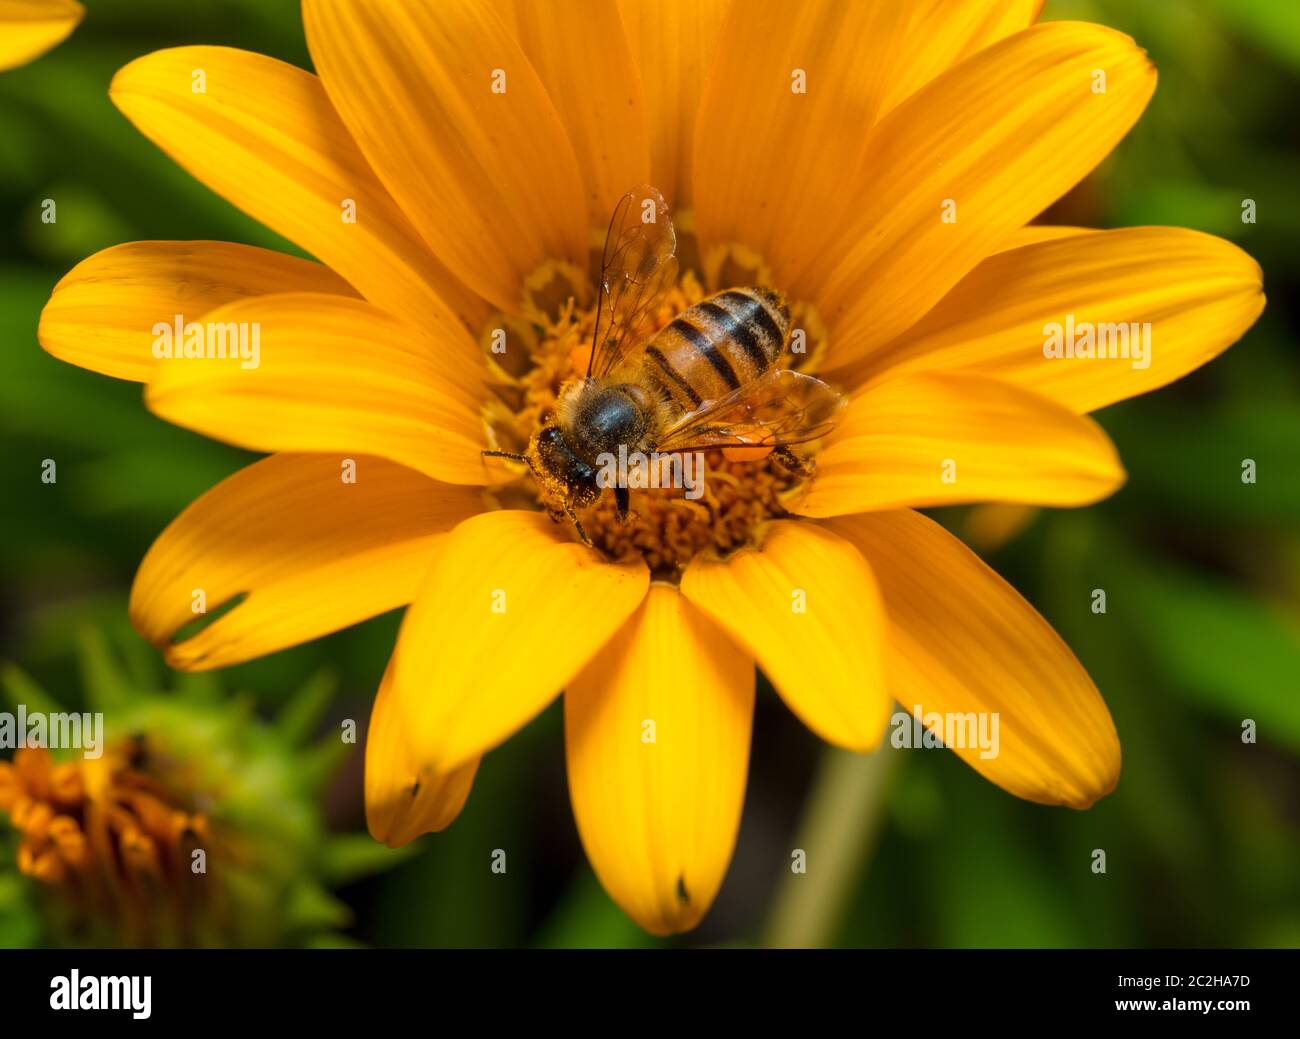 Bee on yellow flower with petals Stock Photo